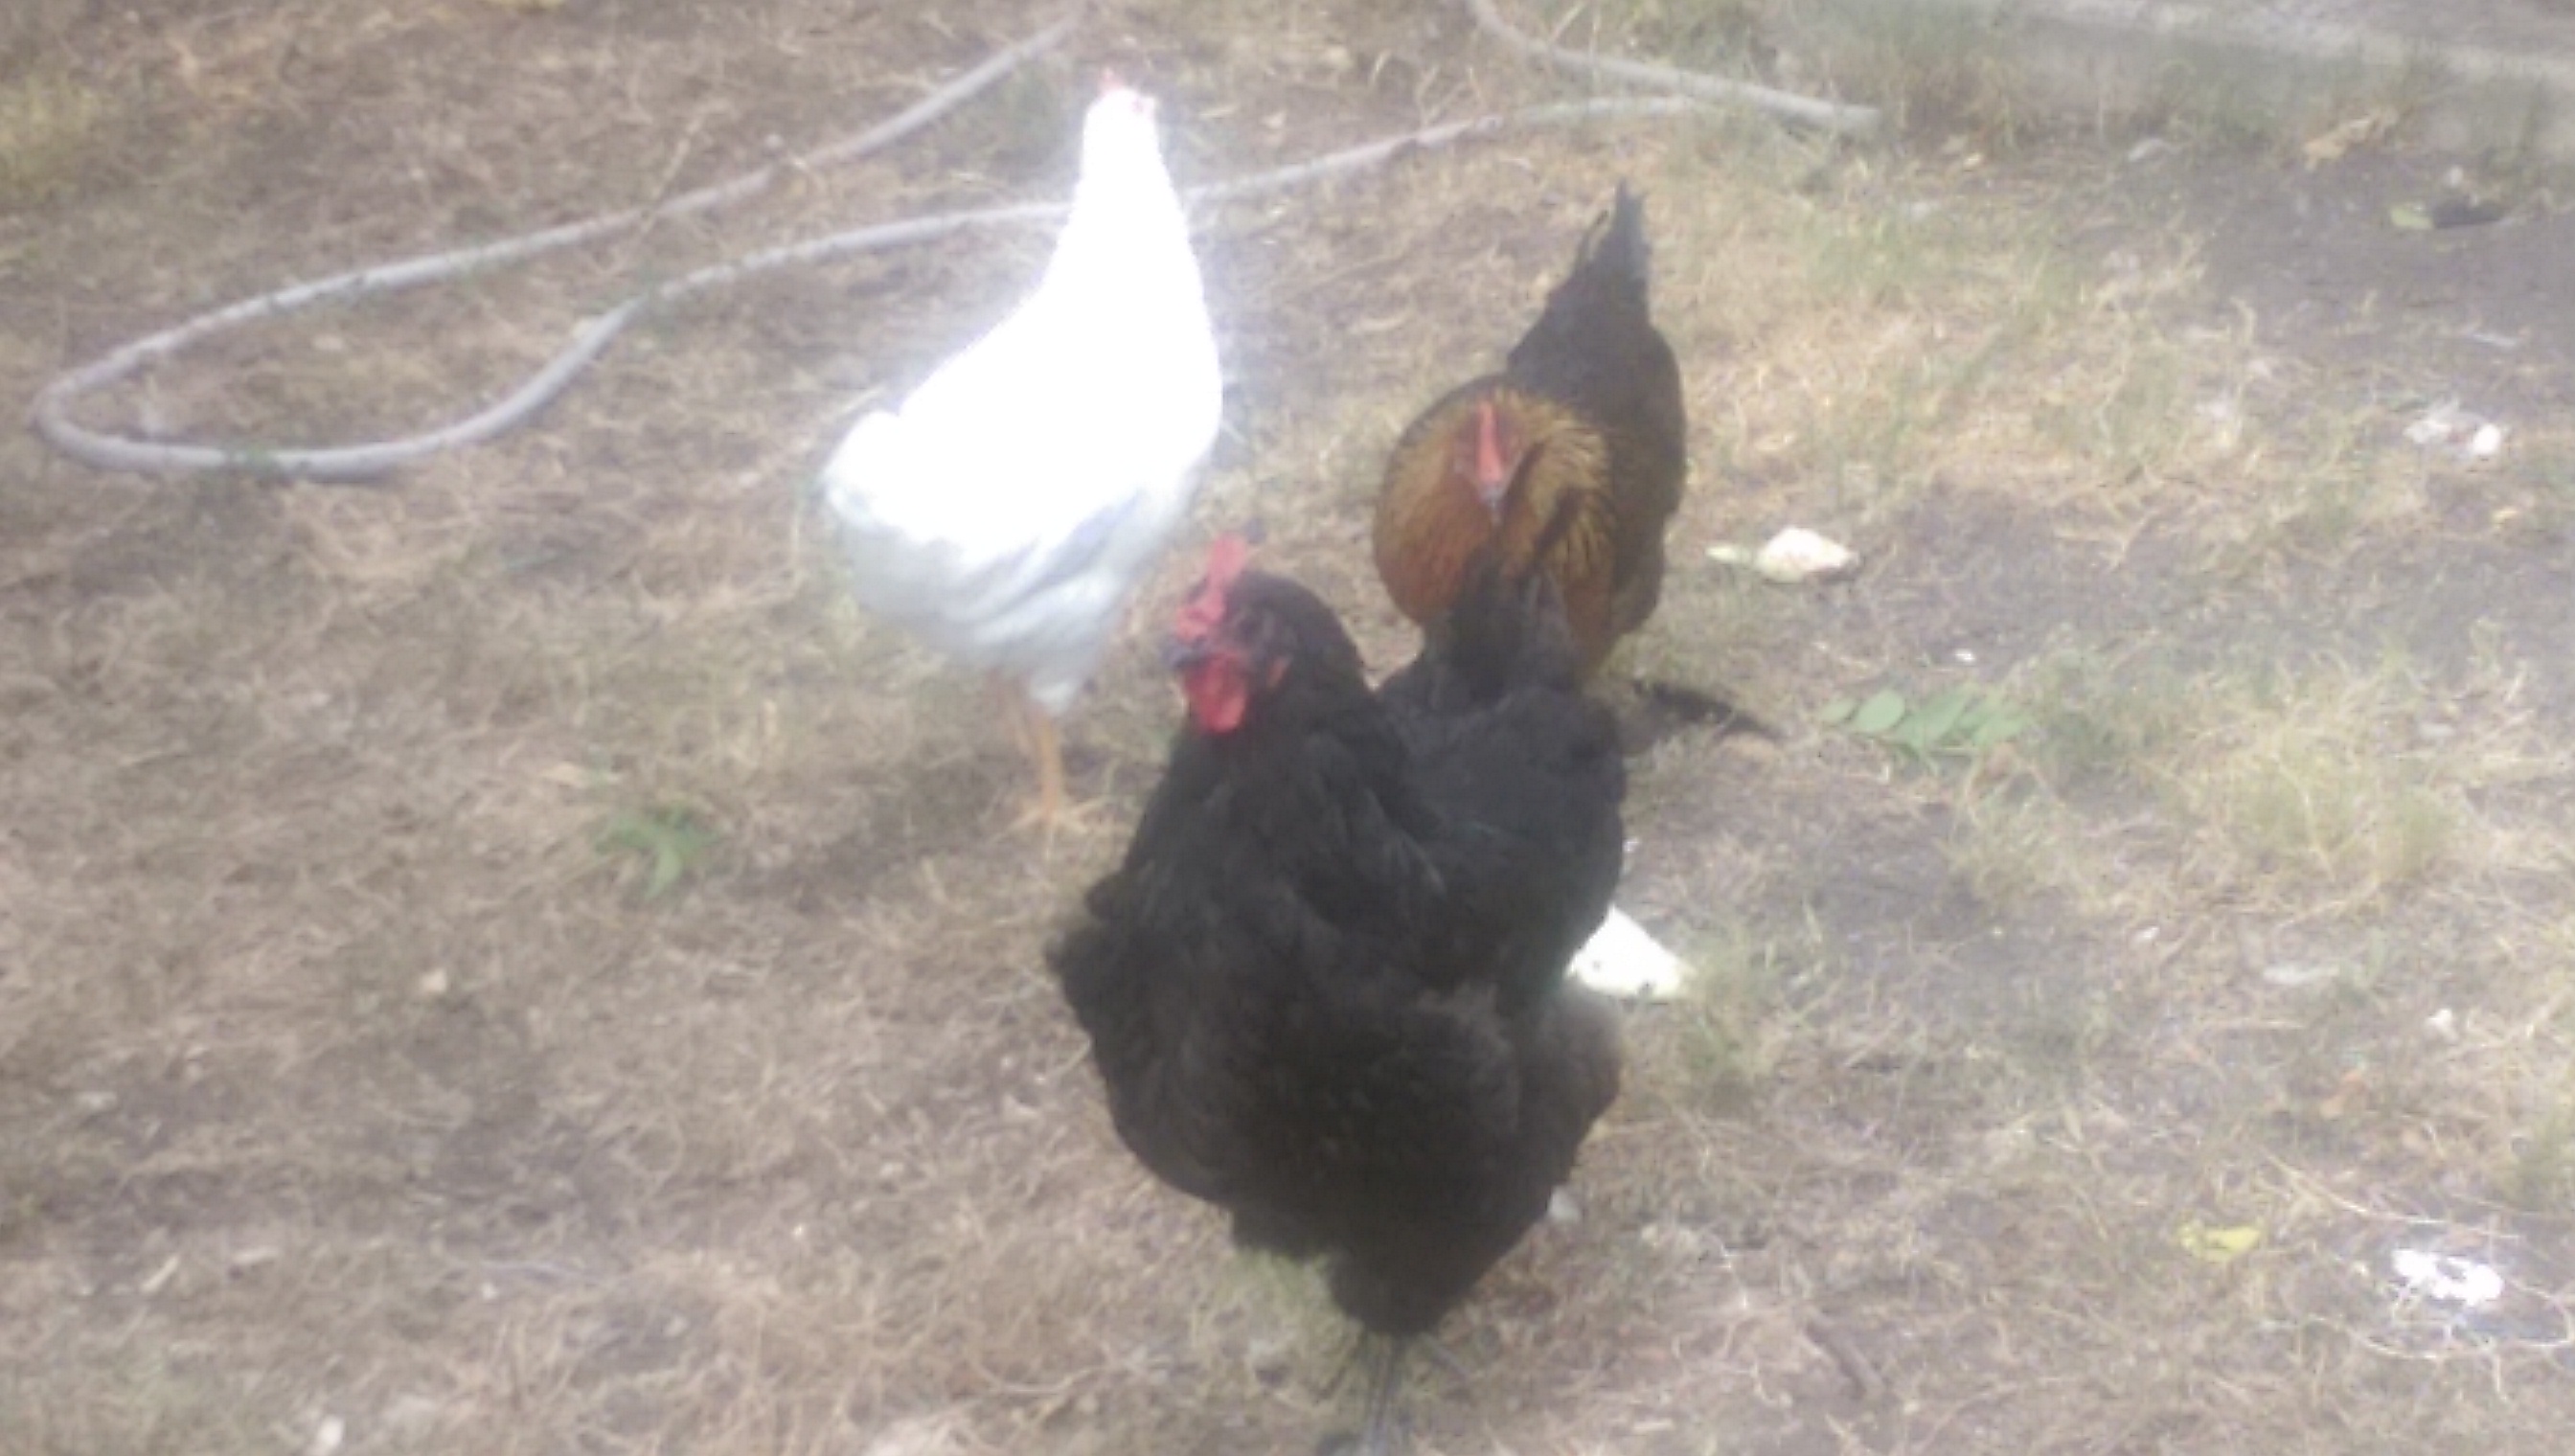 Tippy, black austrolpe, ran to be in front of the picture. Was trying to capture our two leghorns, Singer (white) and Strutter (brown)